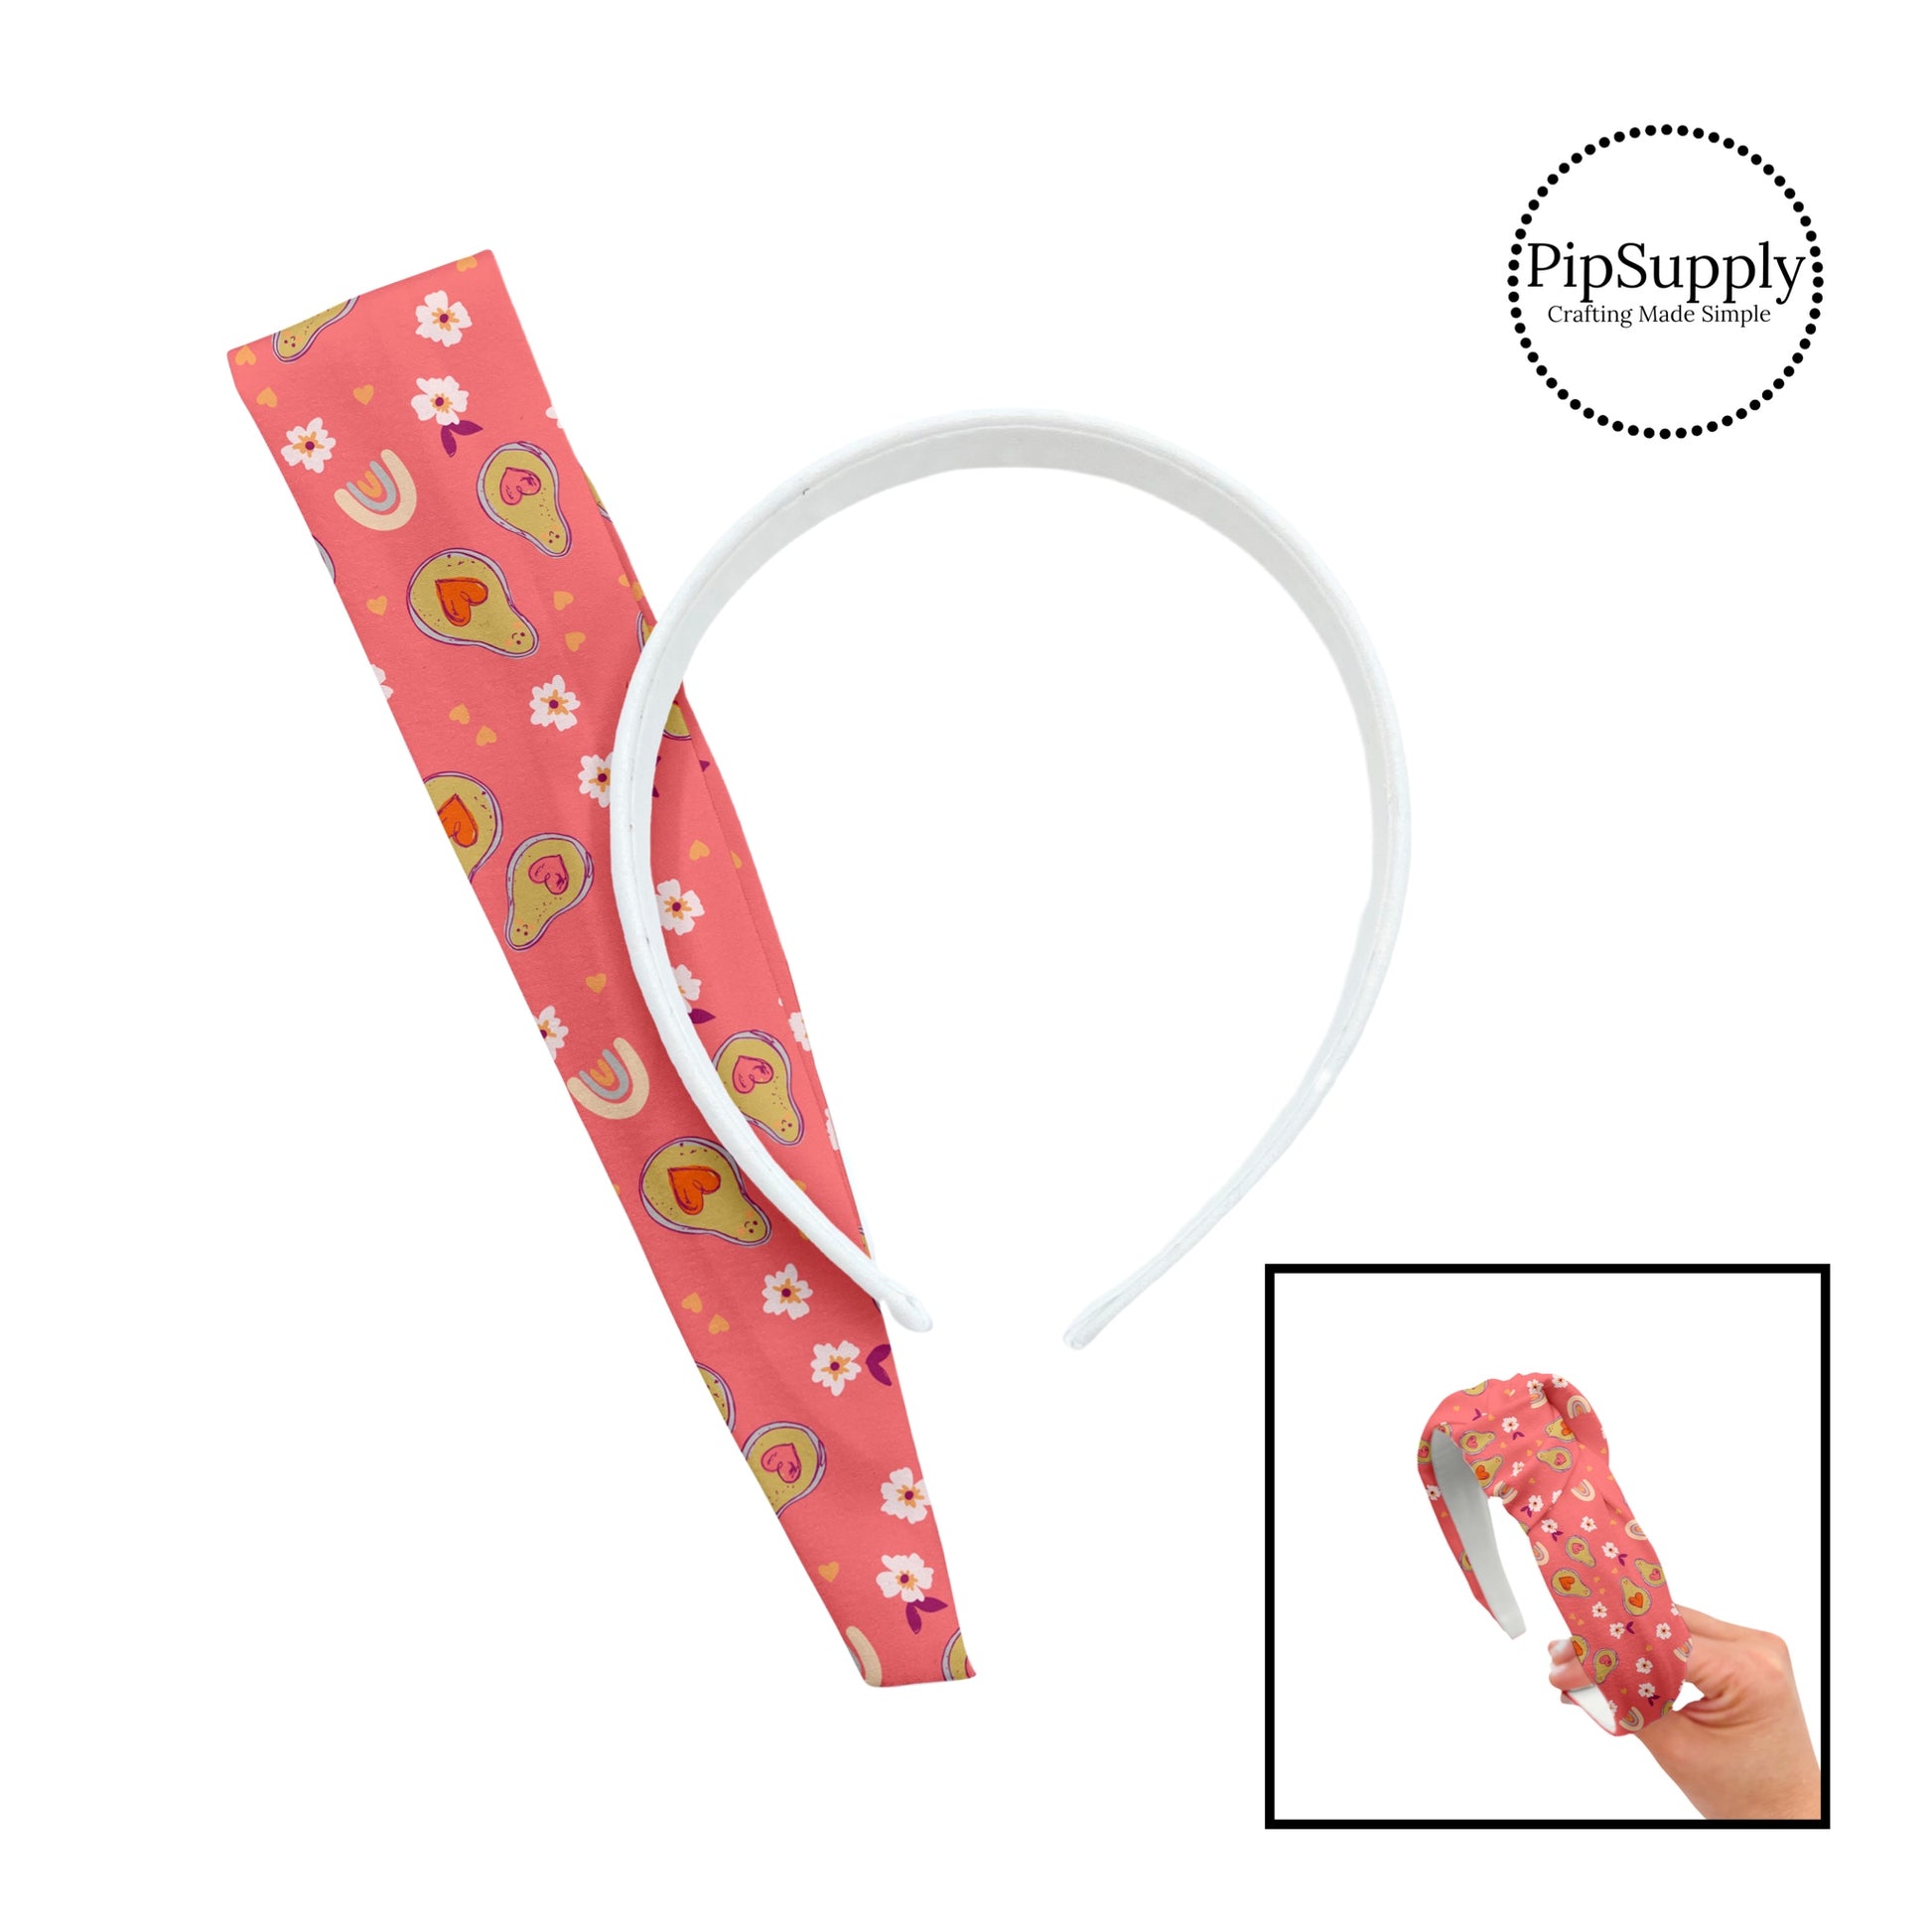 These patterned headband kits are easy to assemble and come with everything you need to make your own knotted headband. These Valentine's Day kits include a custom printed and sewn fabric strip and a coordinating velvet headband. This cute pattern features avocados with hearts surrounded by flowers on pink.